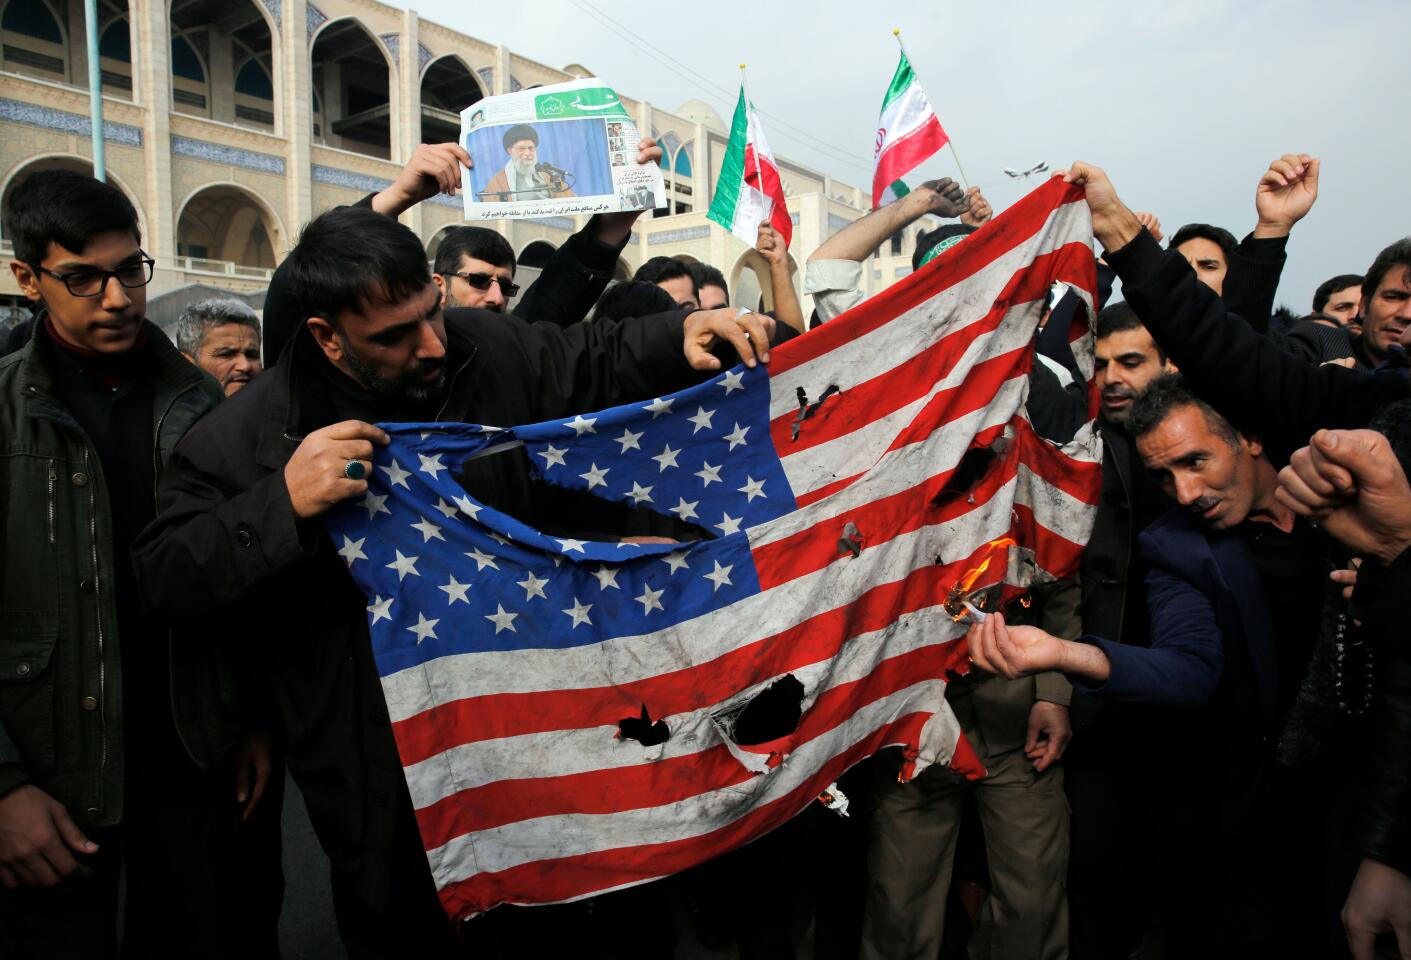 Iranians burn a U.S. flag during a protest in Tehran to condemn Suleimani's killing.